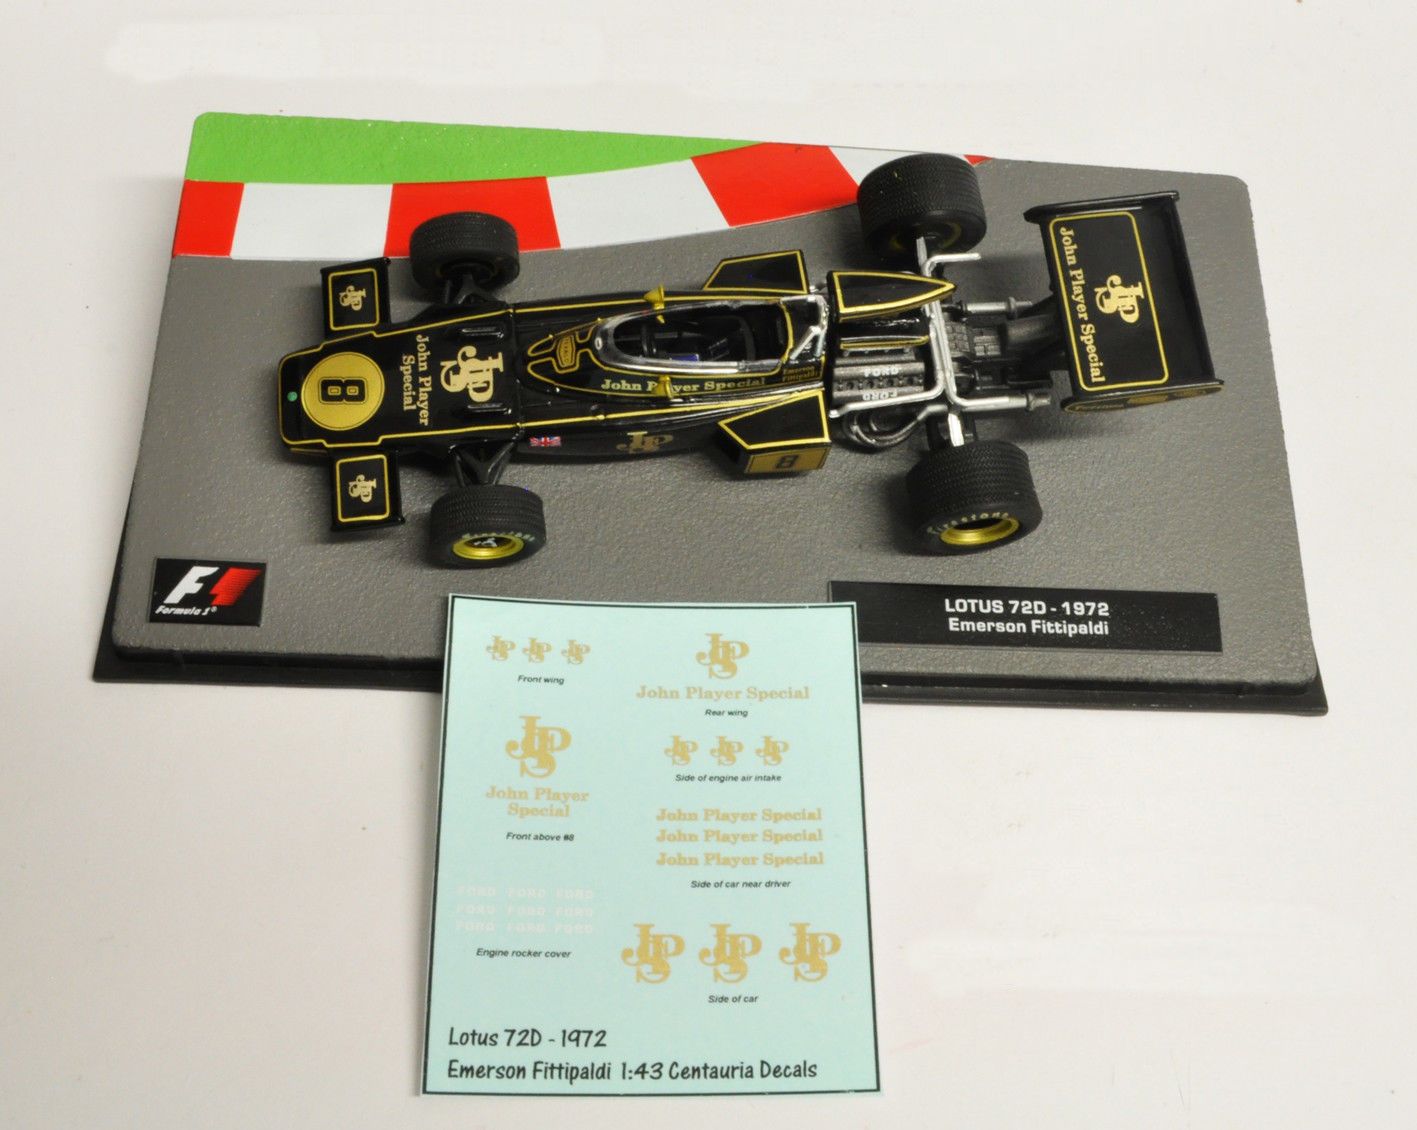 Decals "JPS" - Lotus 72D 1972/ Emerson Fittipaldi